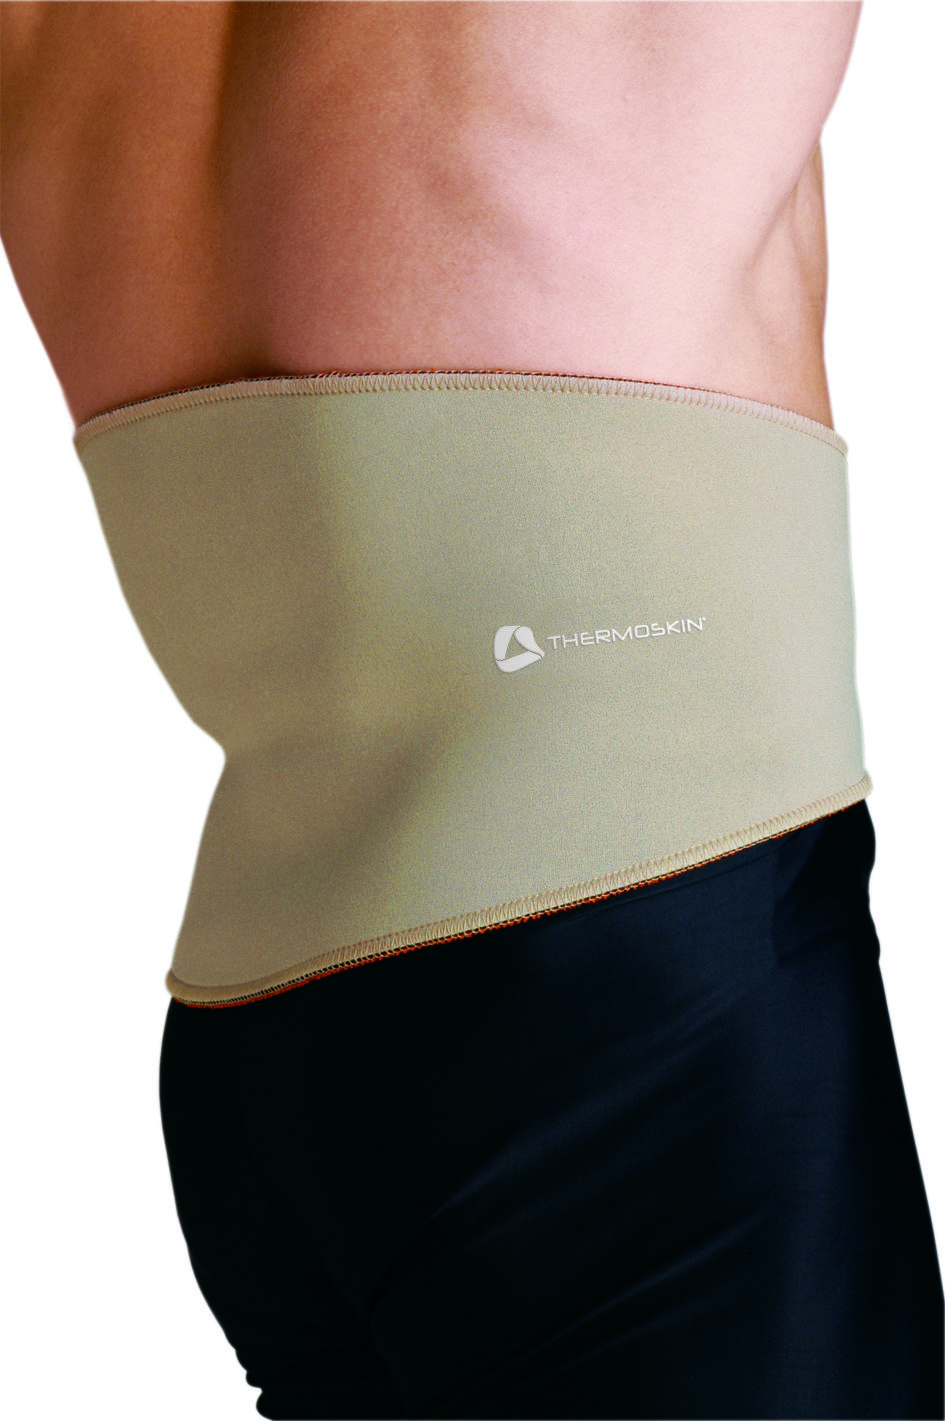 Thermoskin Adjustable Back Support Braces And Supports Back Product